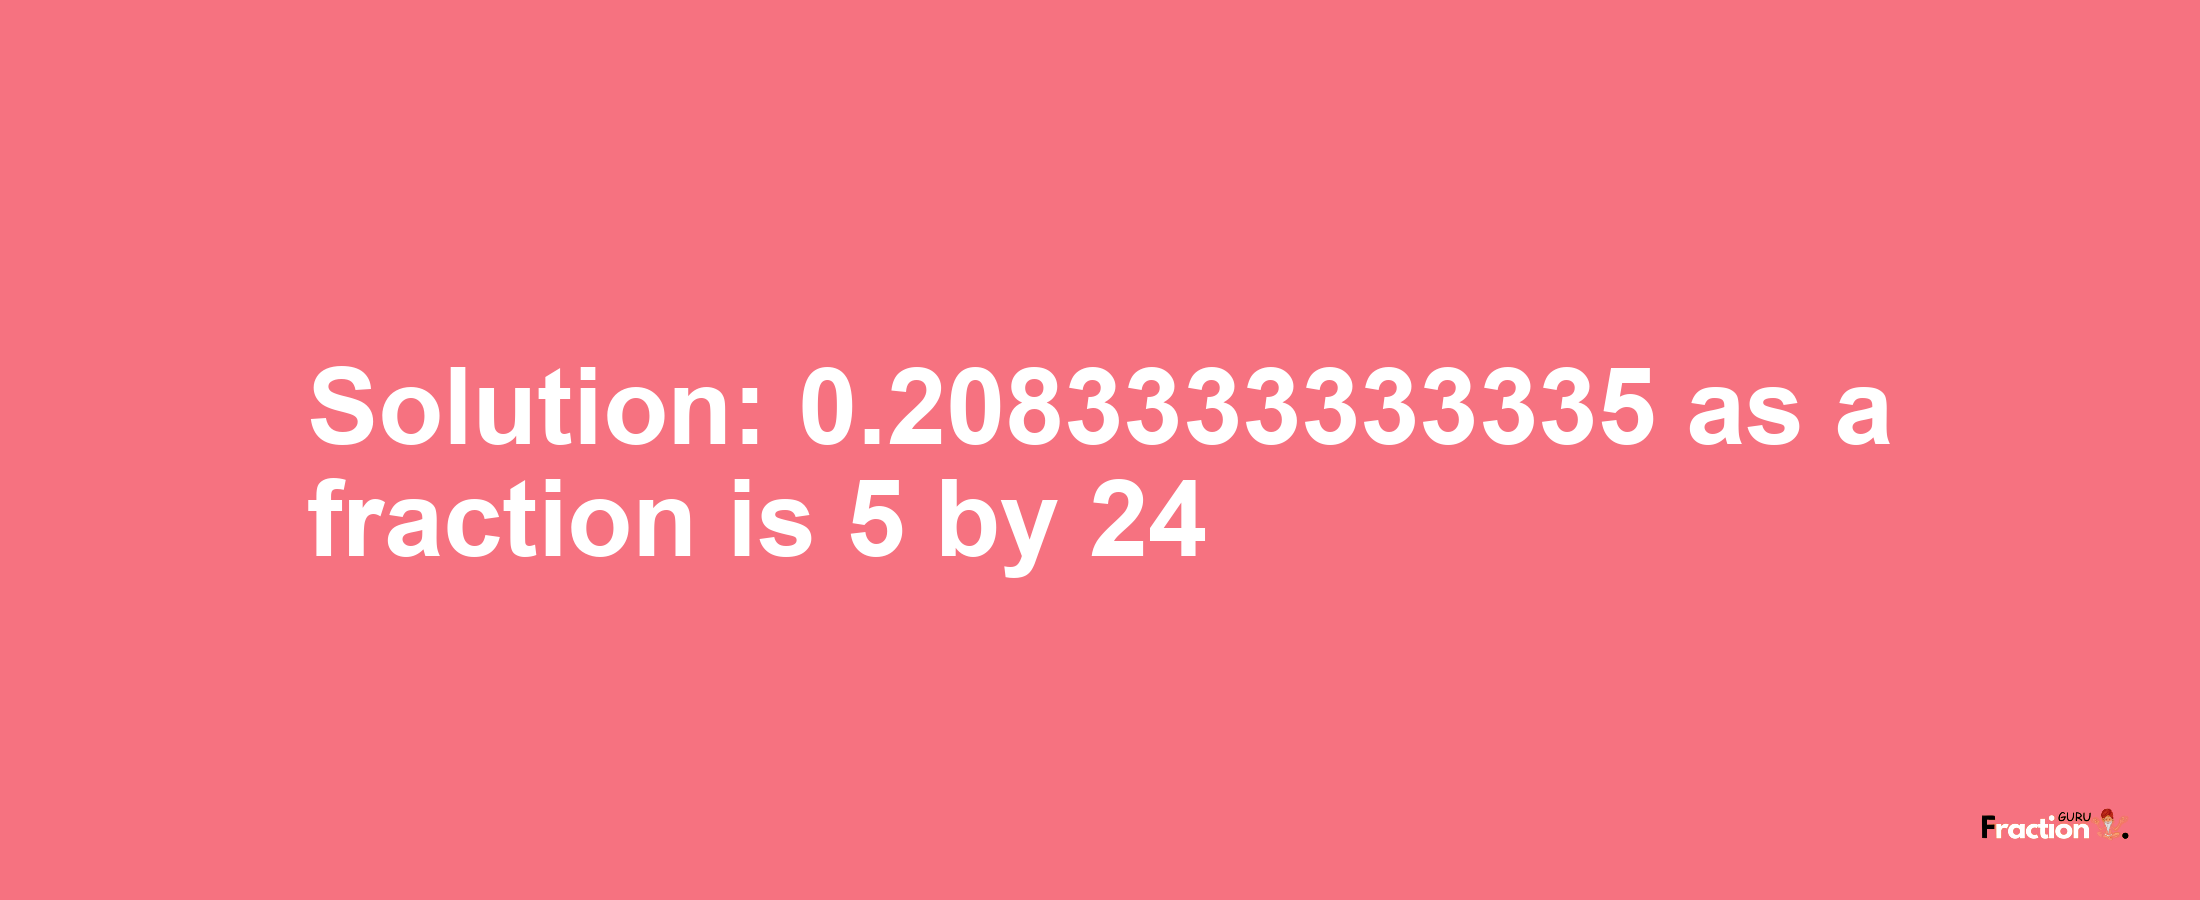 Solution:0.2083333333335 as a fraction is 5/24